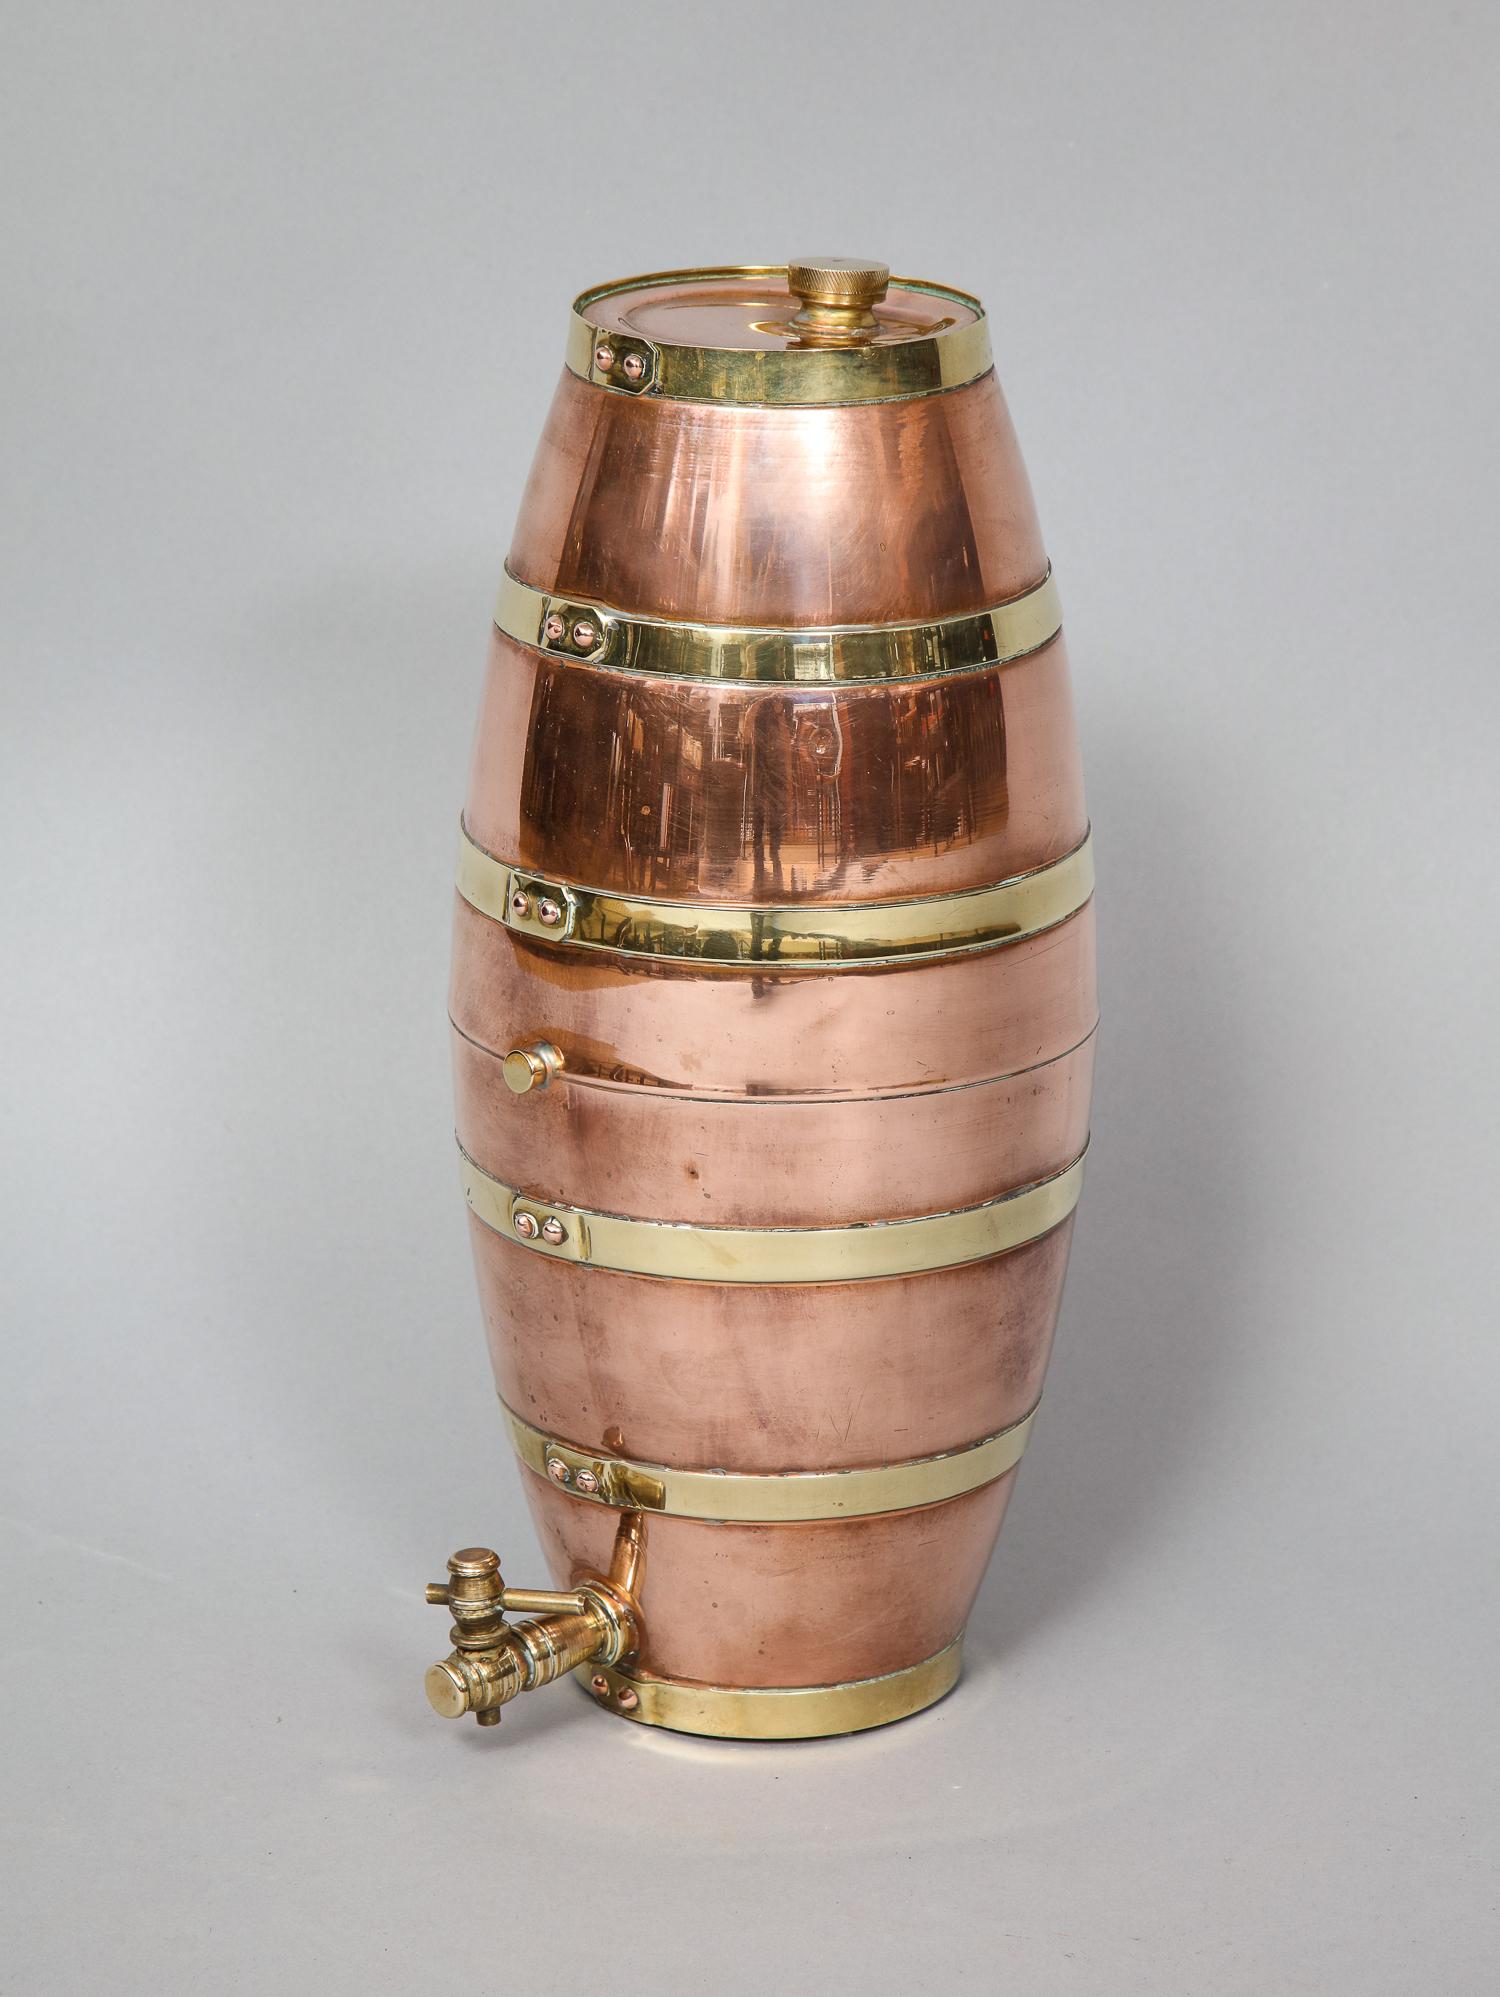 Fine Edwardian copper and brass spirit container of barrel form with riveted construction and having gleaming surface.